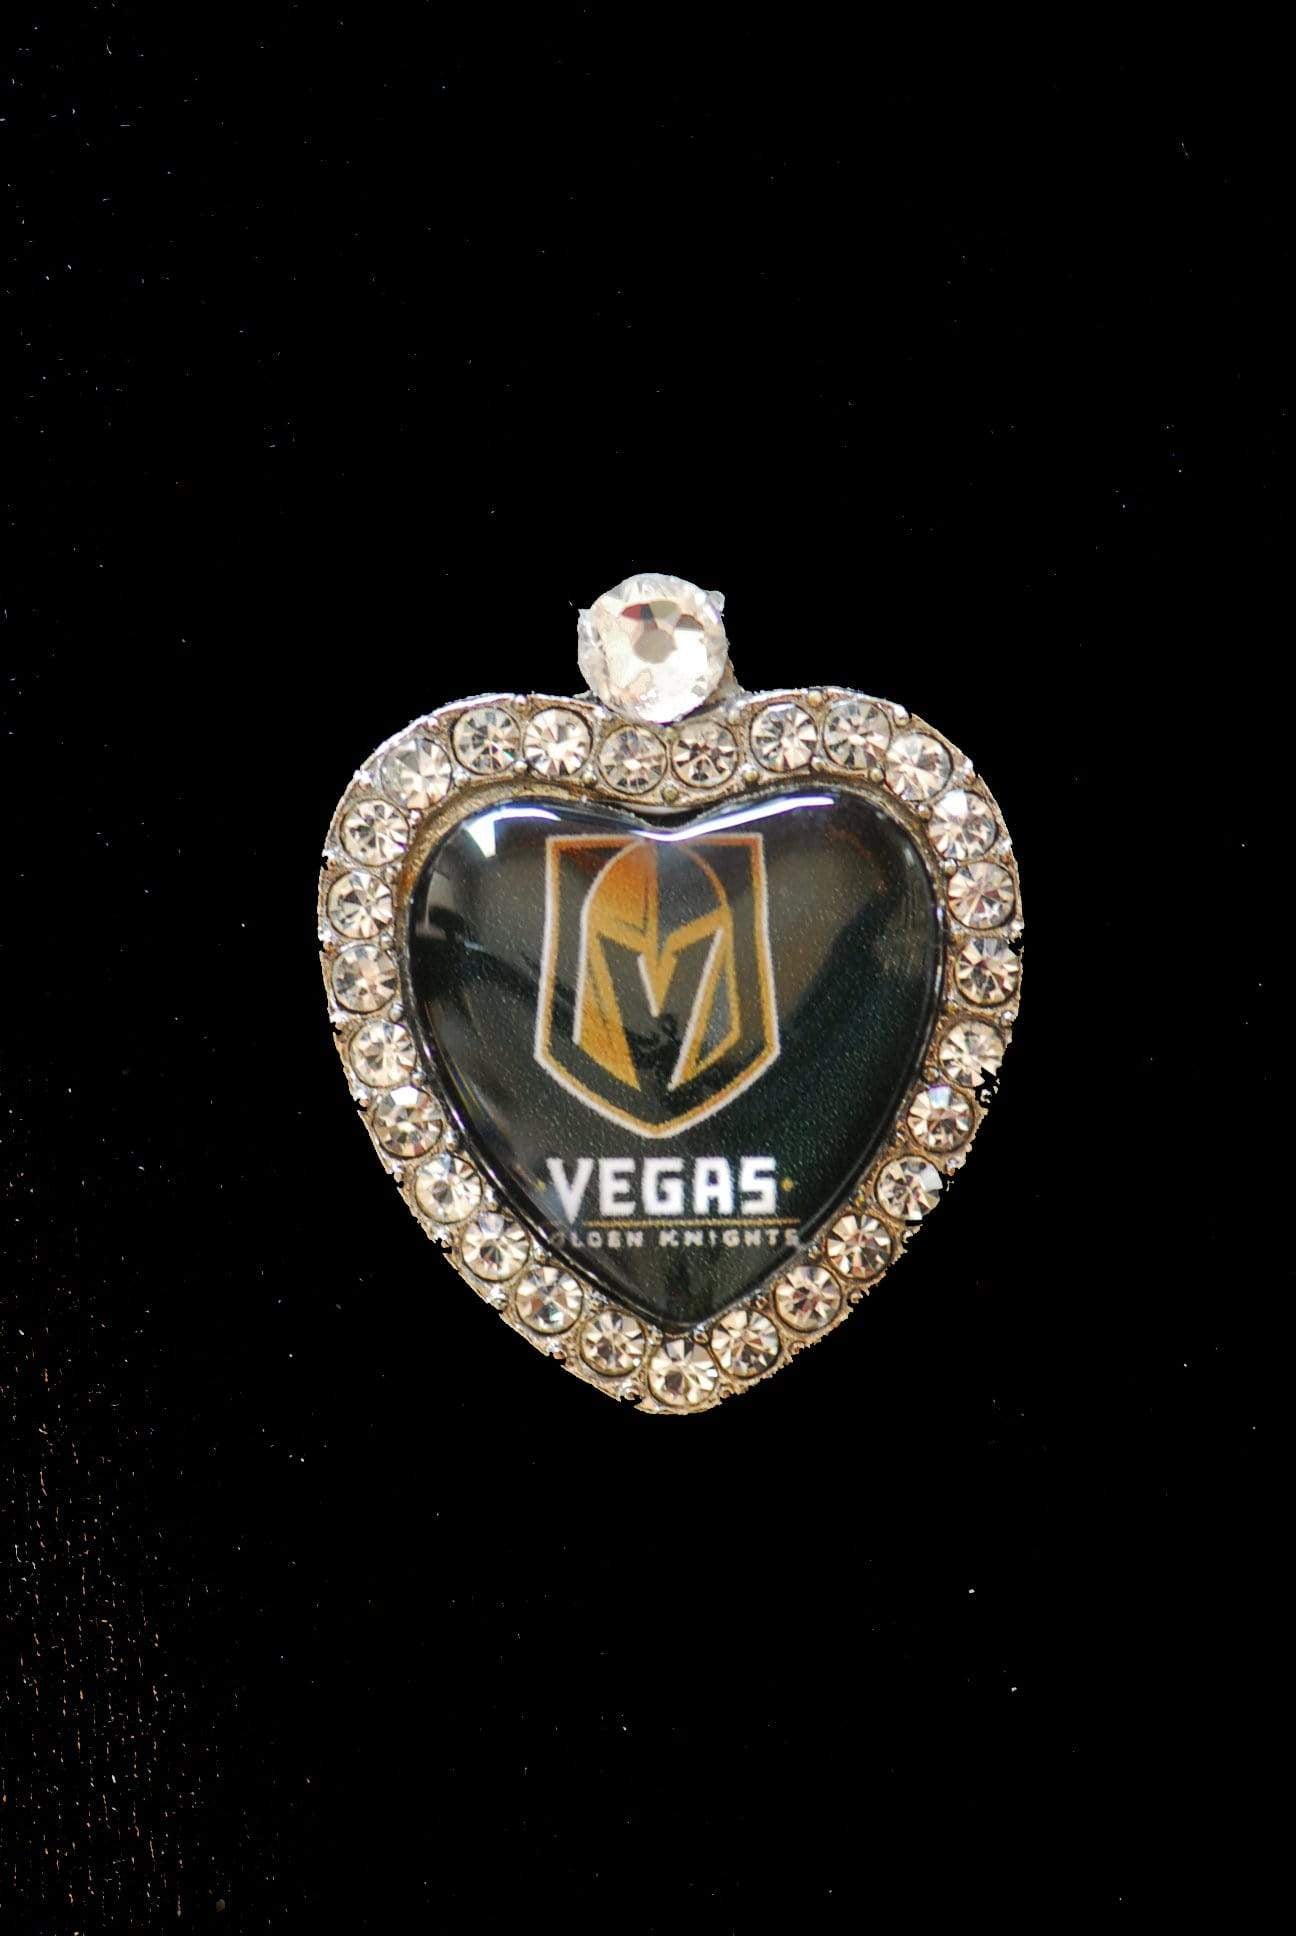 Drinkware E-VGN Black Heart Tipsy Sip1 1/8" X 7/8" Winey Bitches Co Tipsy Sips Las Vegas Golden Knights "Magnetic Bling for your Glass" Many styles to choose from WineyBitchesCo